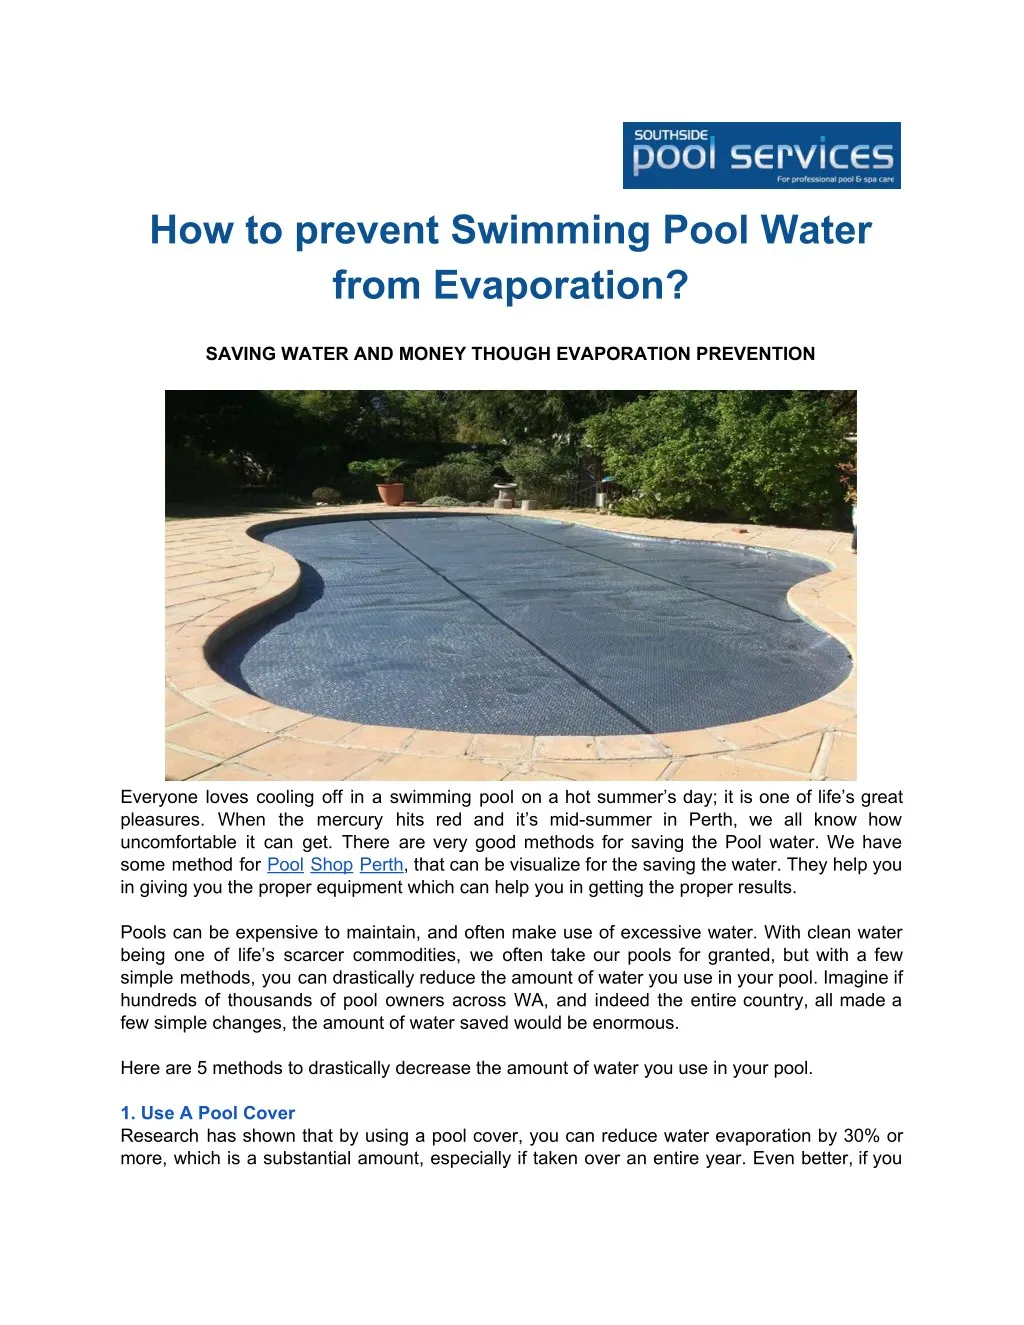 how to prevent swimming pool water from